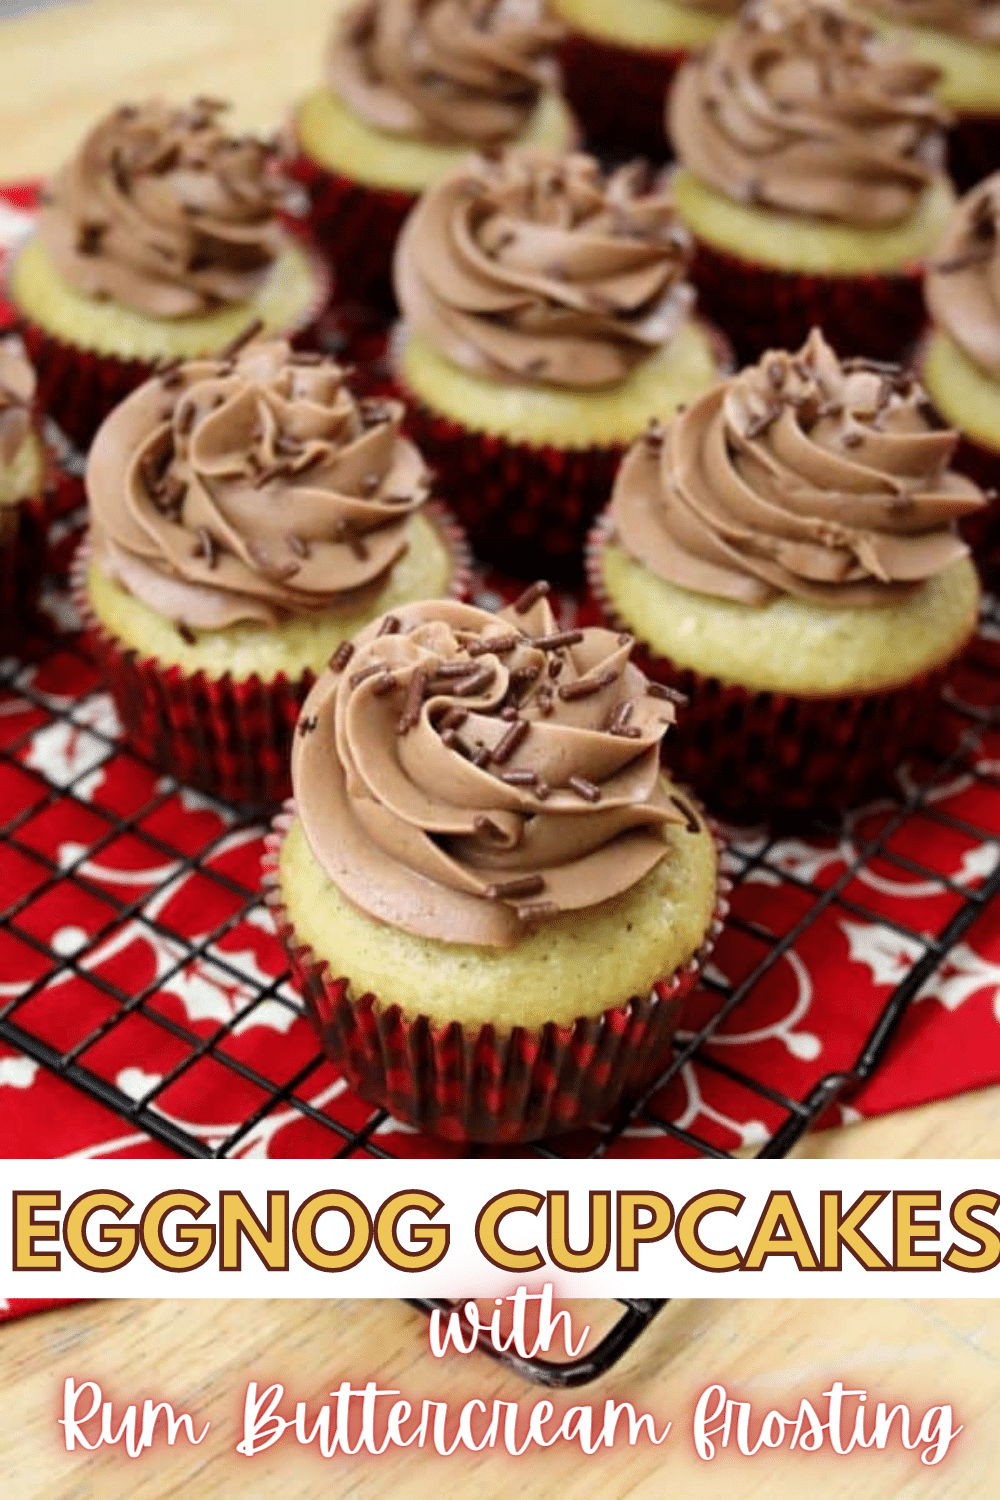 If you like eggnog, you are going to love these Eggnog Cupcakes with Rum Buttercream Frosting. You can eat your calories, rather than drink them! #eggnog #cupcakes #rumbuttercreamfrosting #christmas via @wondermomwannab